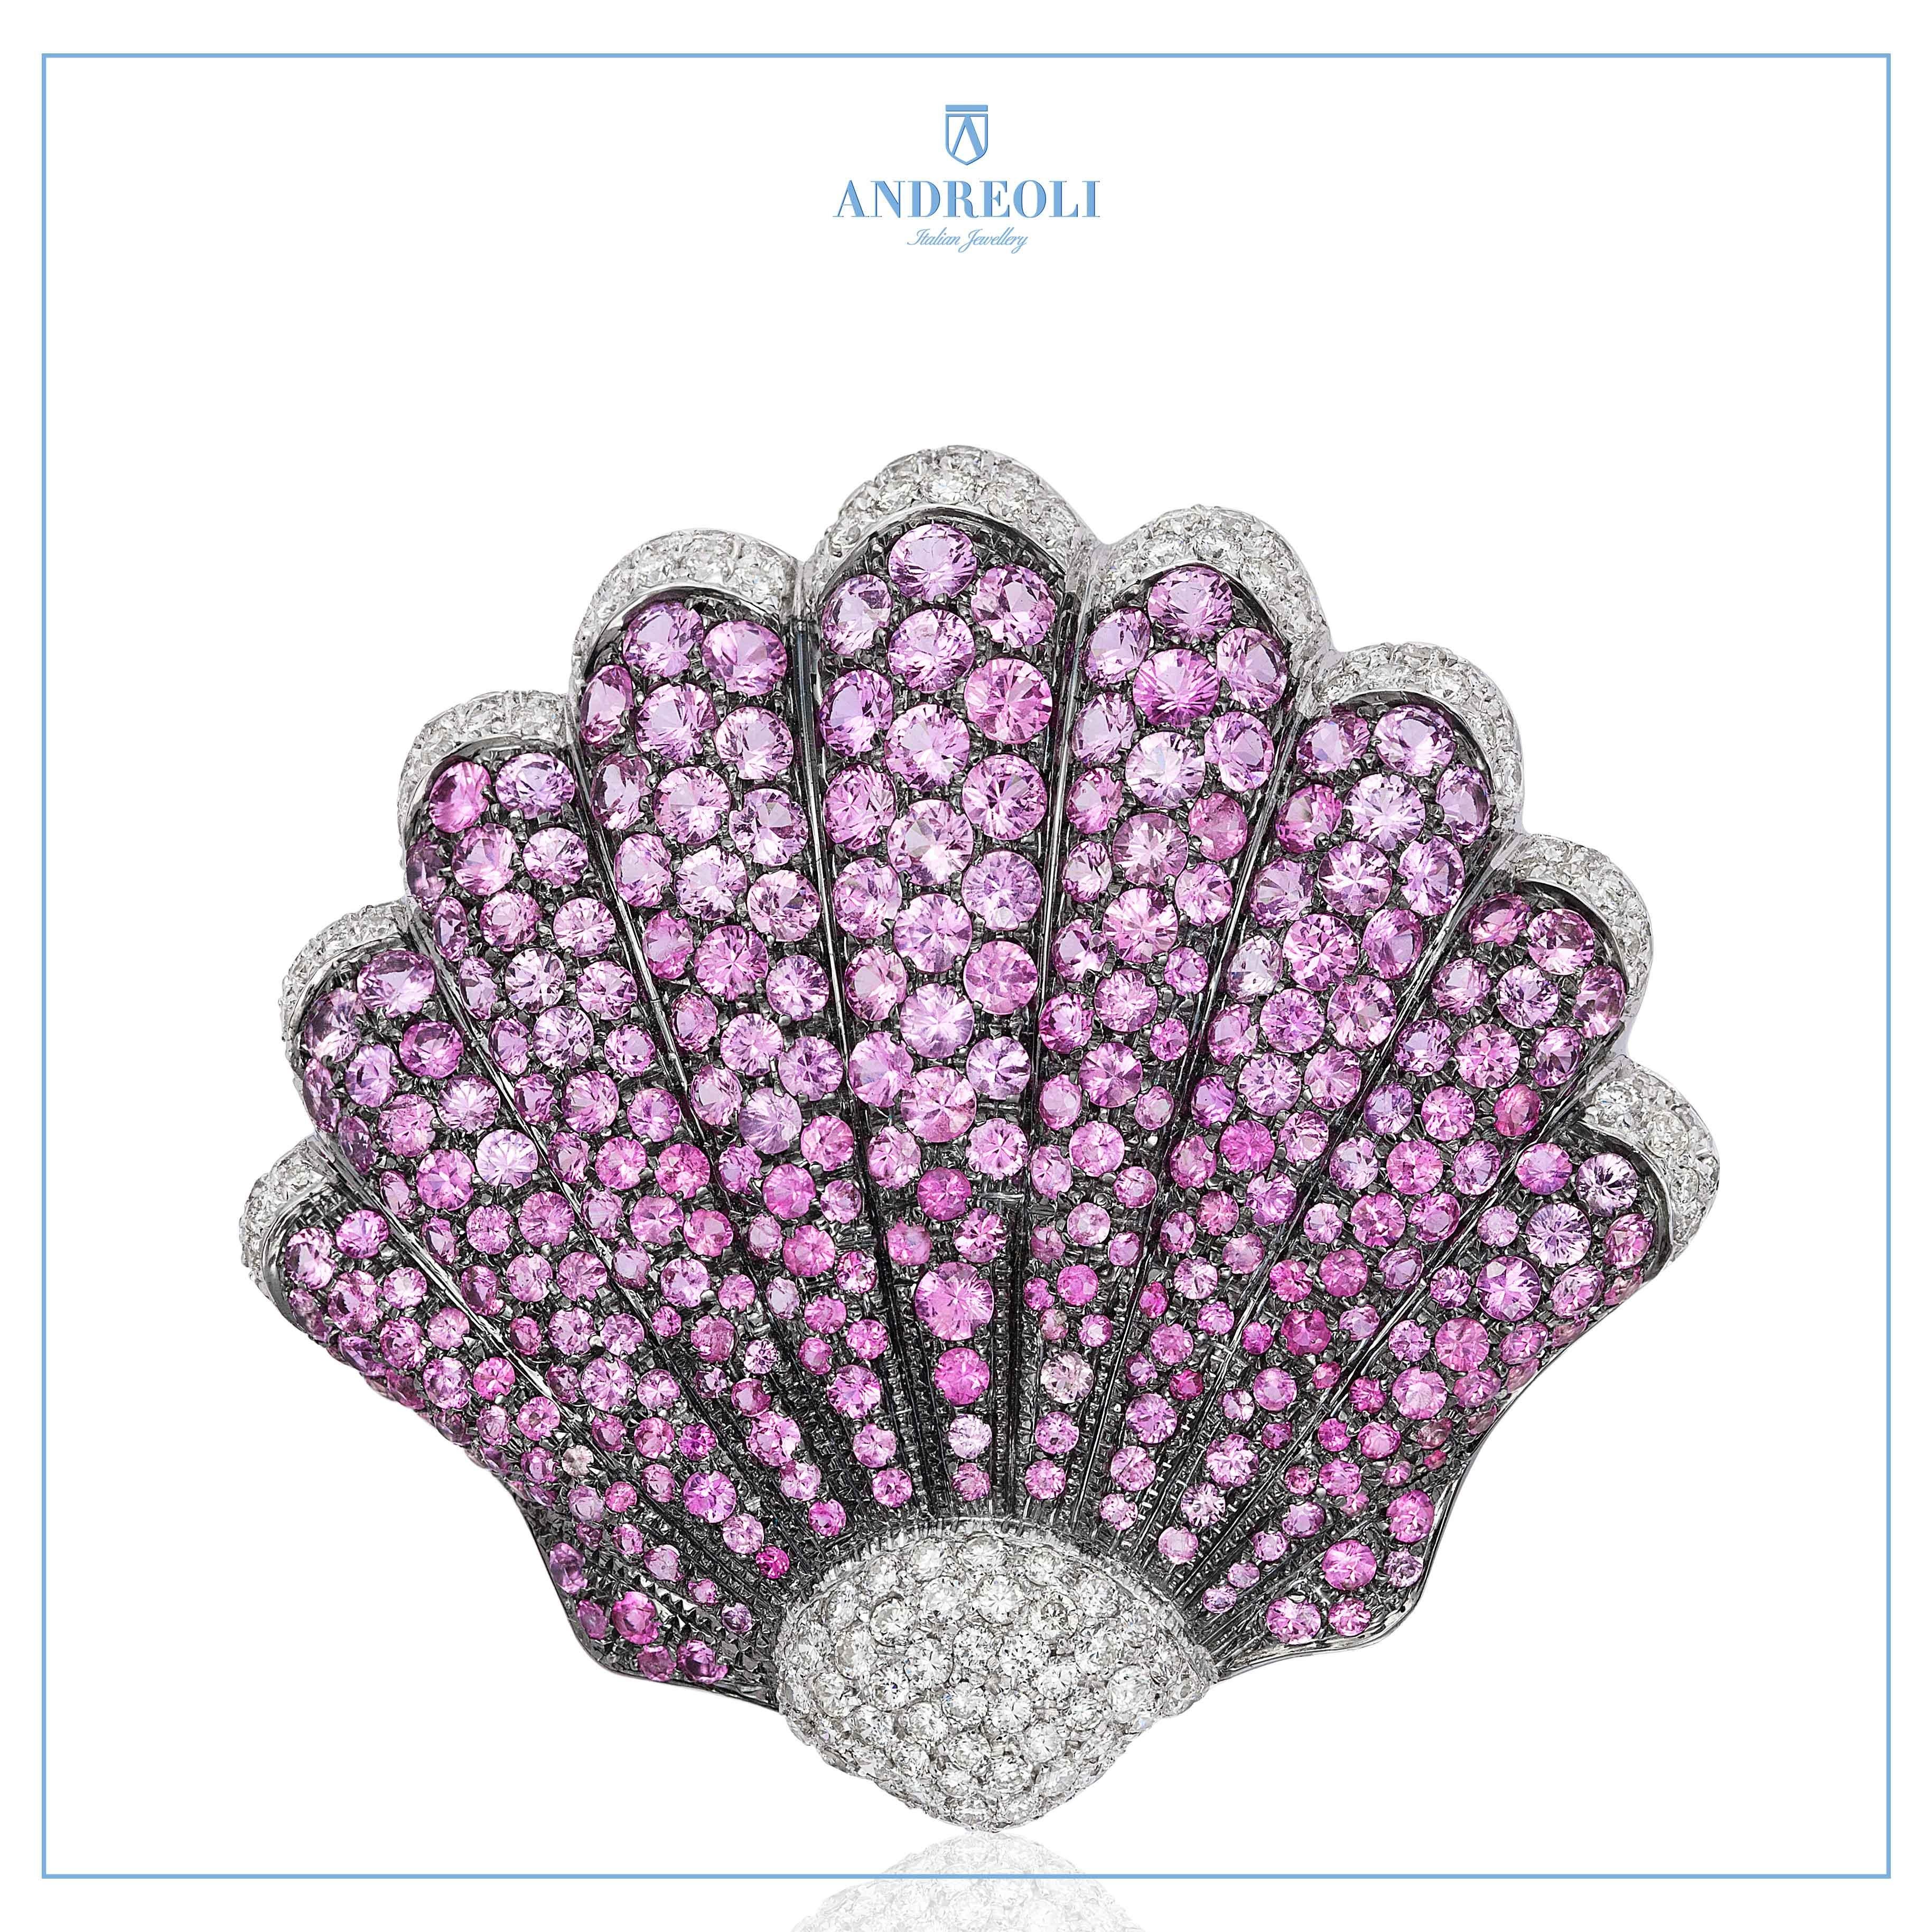 Contemporary Andreoli Pink Sapphire Diamond Seashell Brooch Pin 18 Karat White Gold For Sale